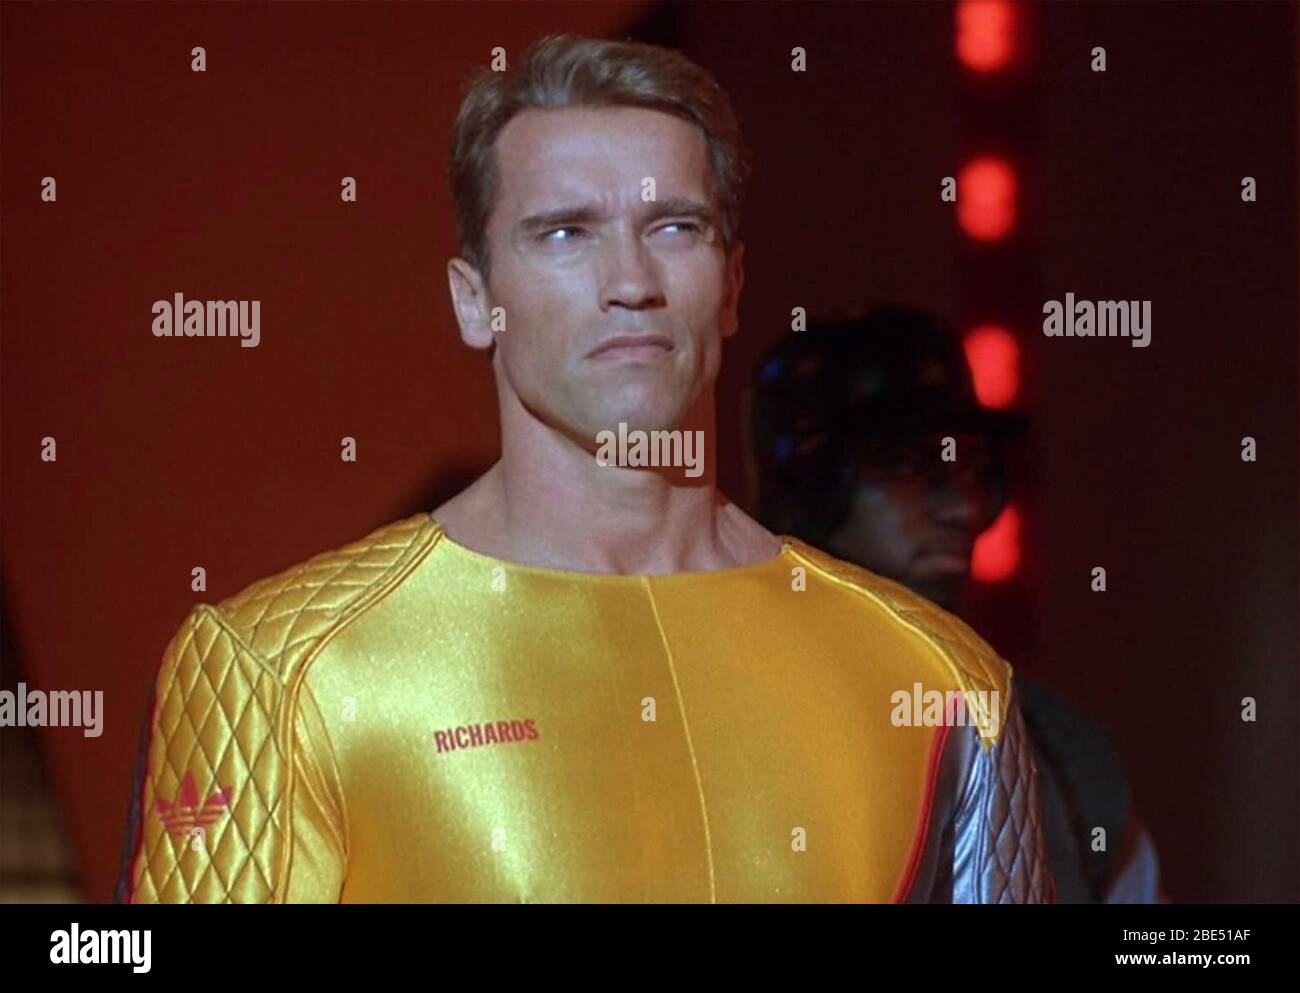 THE RUNNING MAN 1987 TriStar Pictures film with Arnold Schwarzenegger